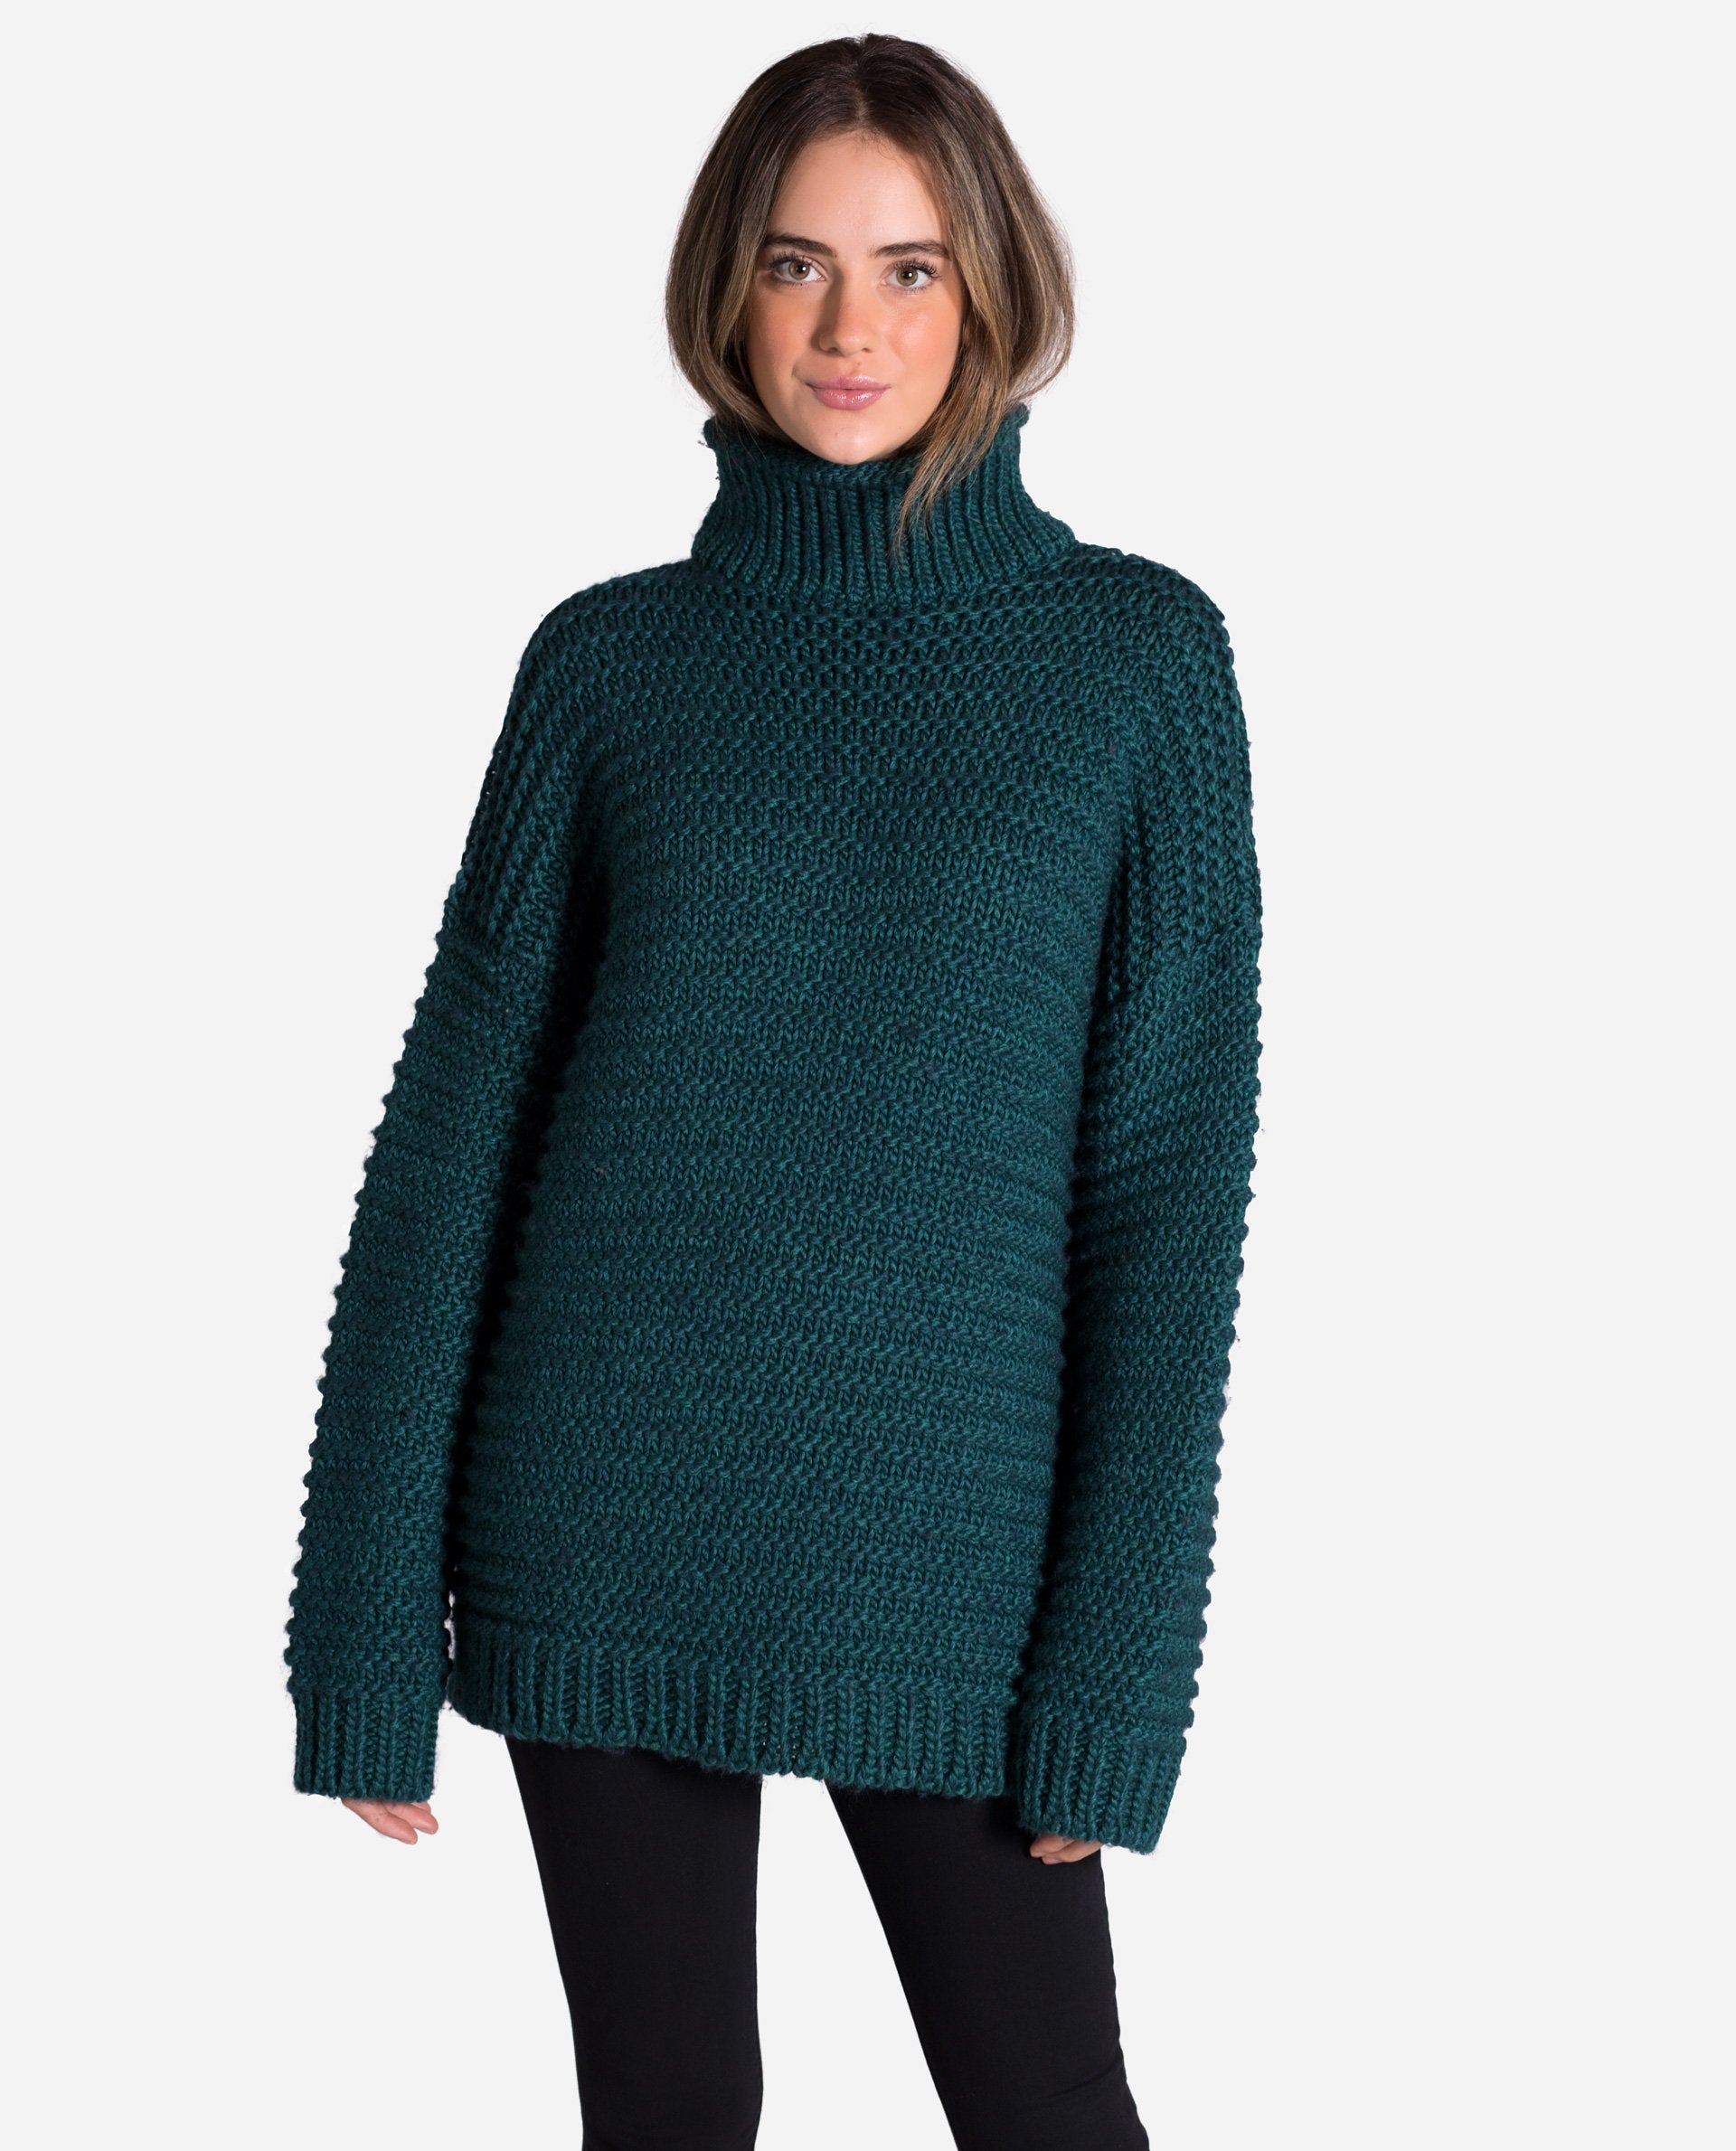 JERSEY CITY | Jersey verde cuello alto oversize mujer | Jerseys anchos chicas | THE-ARE